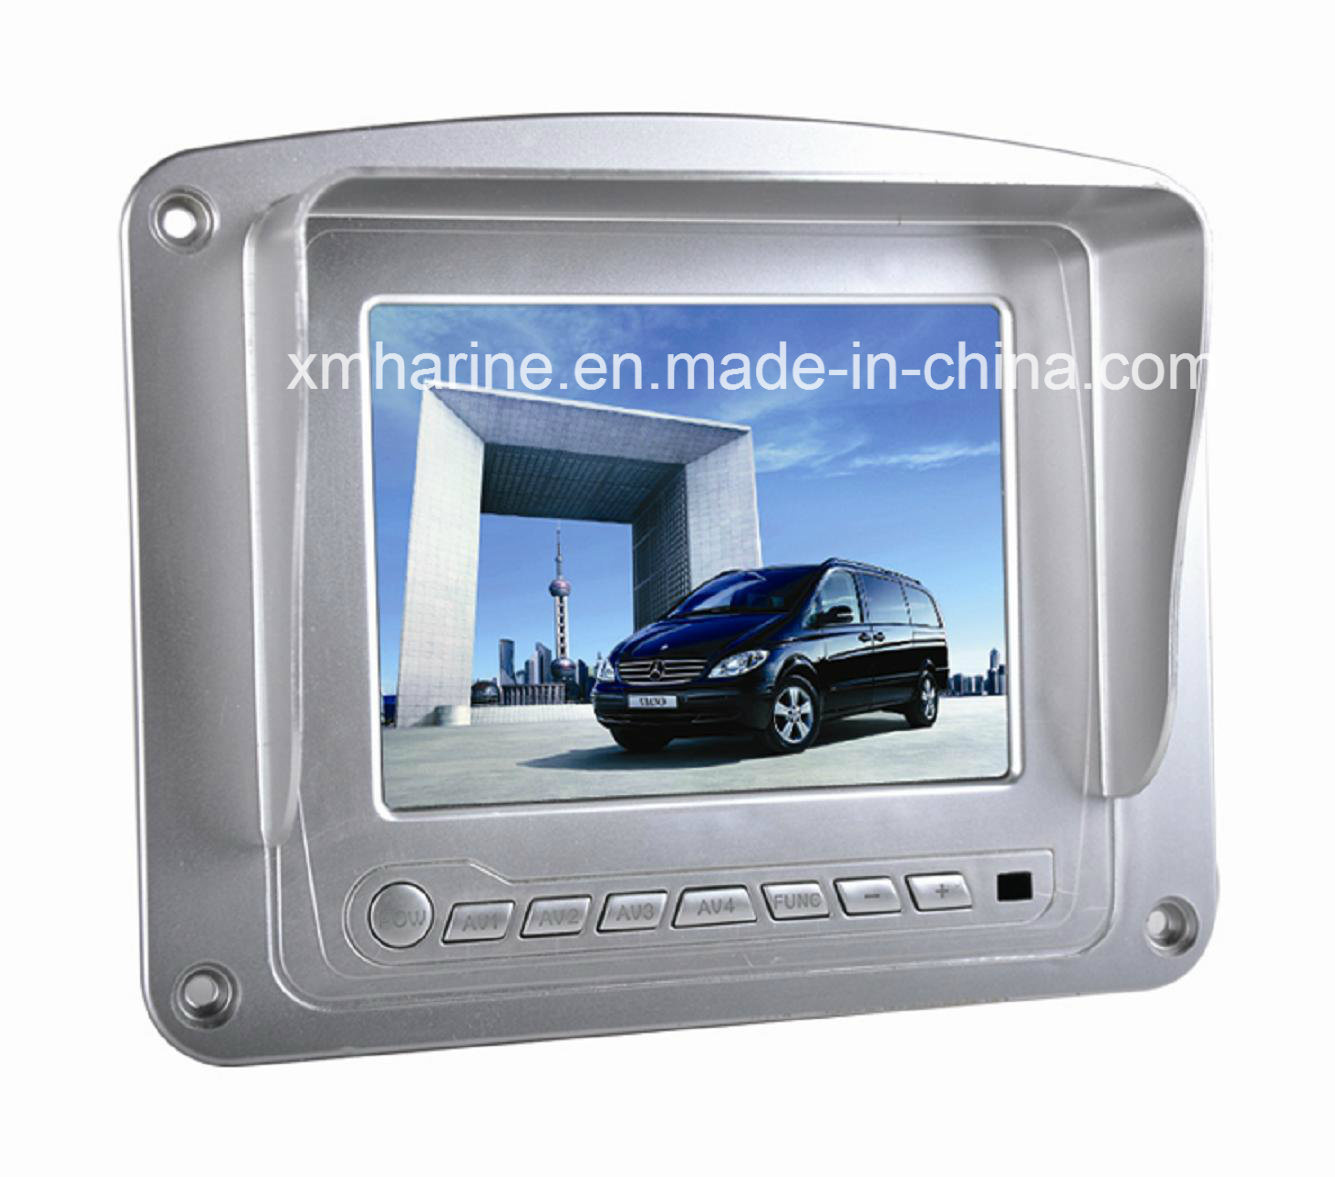 5.6inches LCD Color Car Parking Rear View System